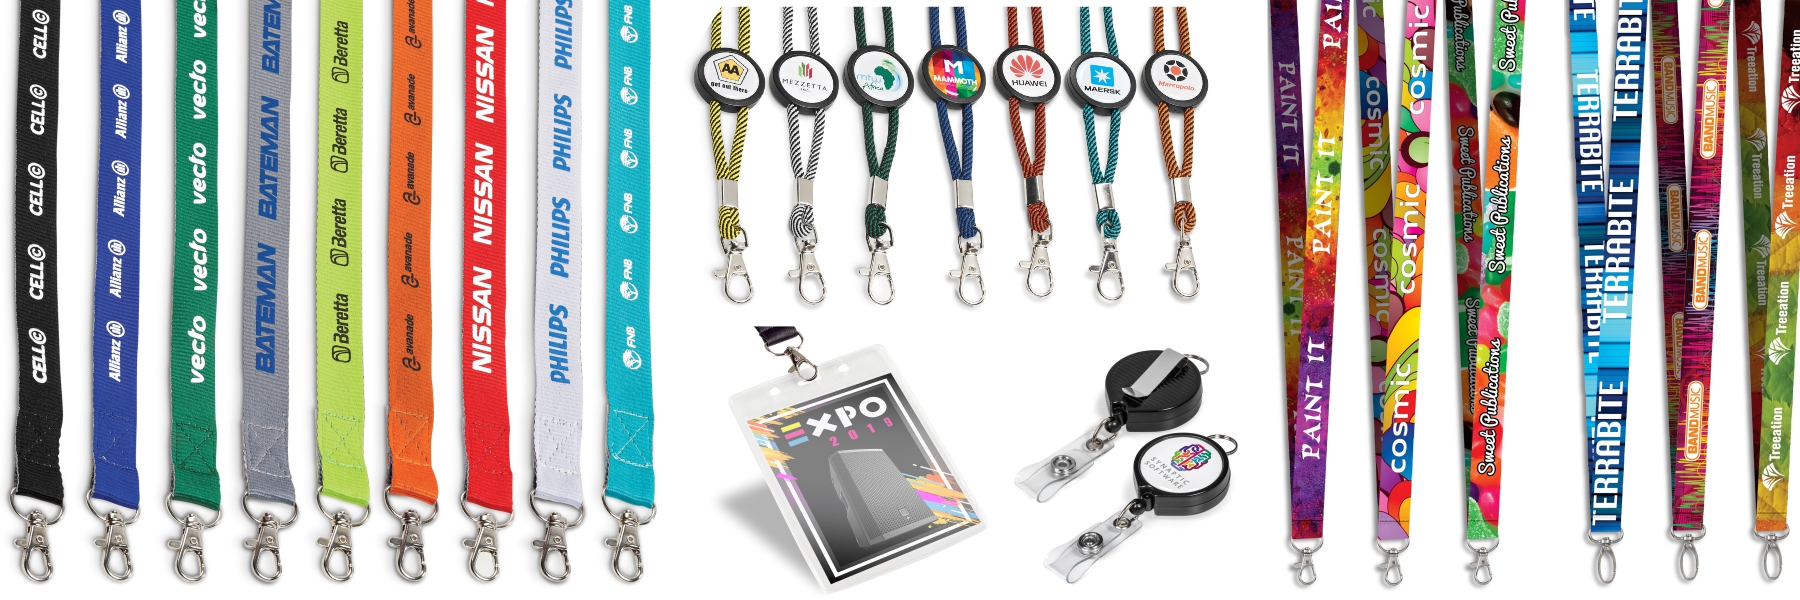 The Versatility and Benefits of Lanyards: Choose Best Branding South Africa as Your Preferred Lanyard Supplier